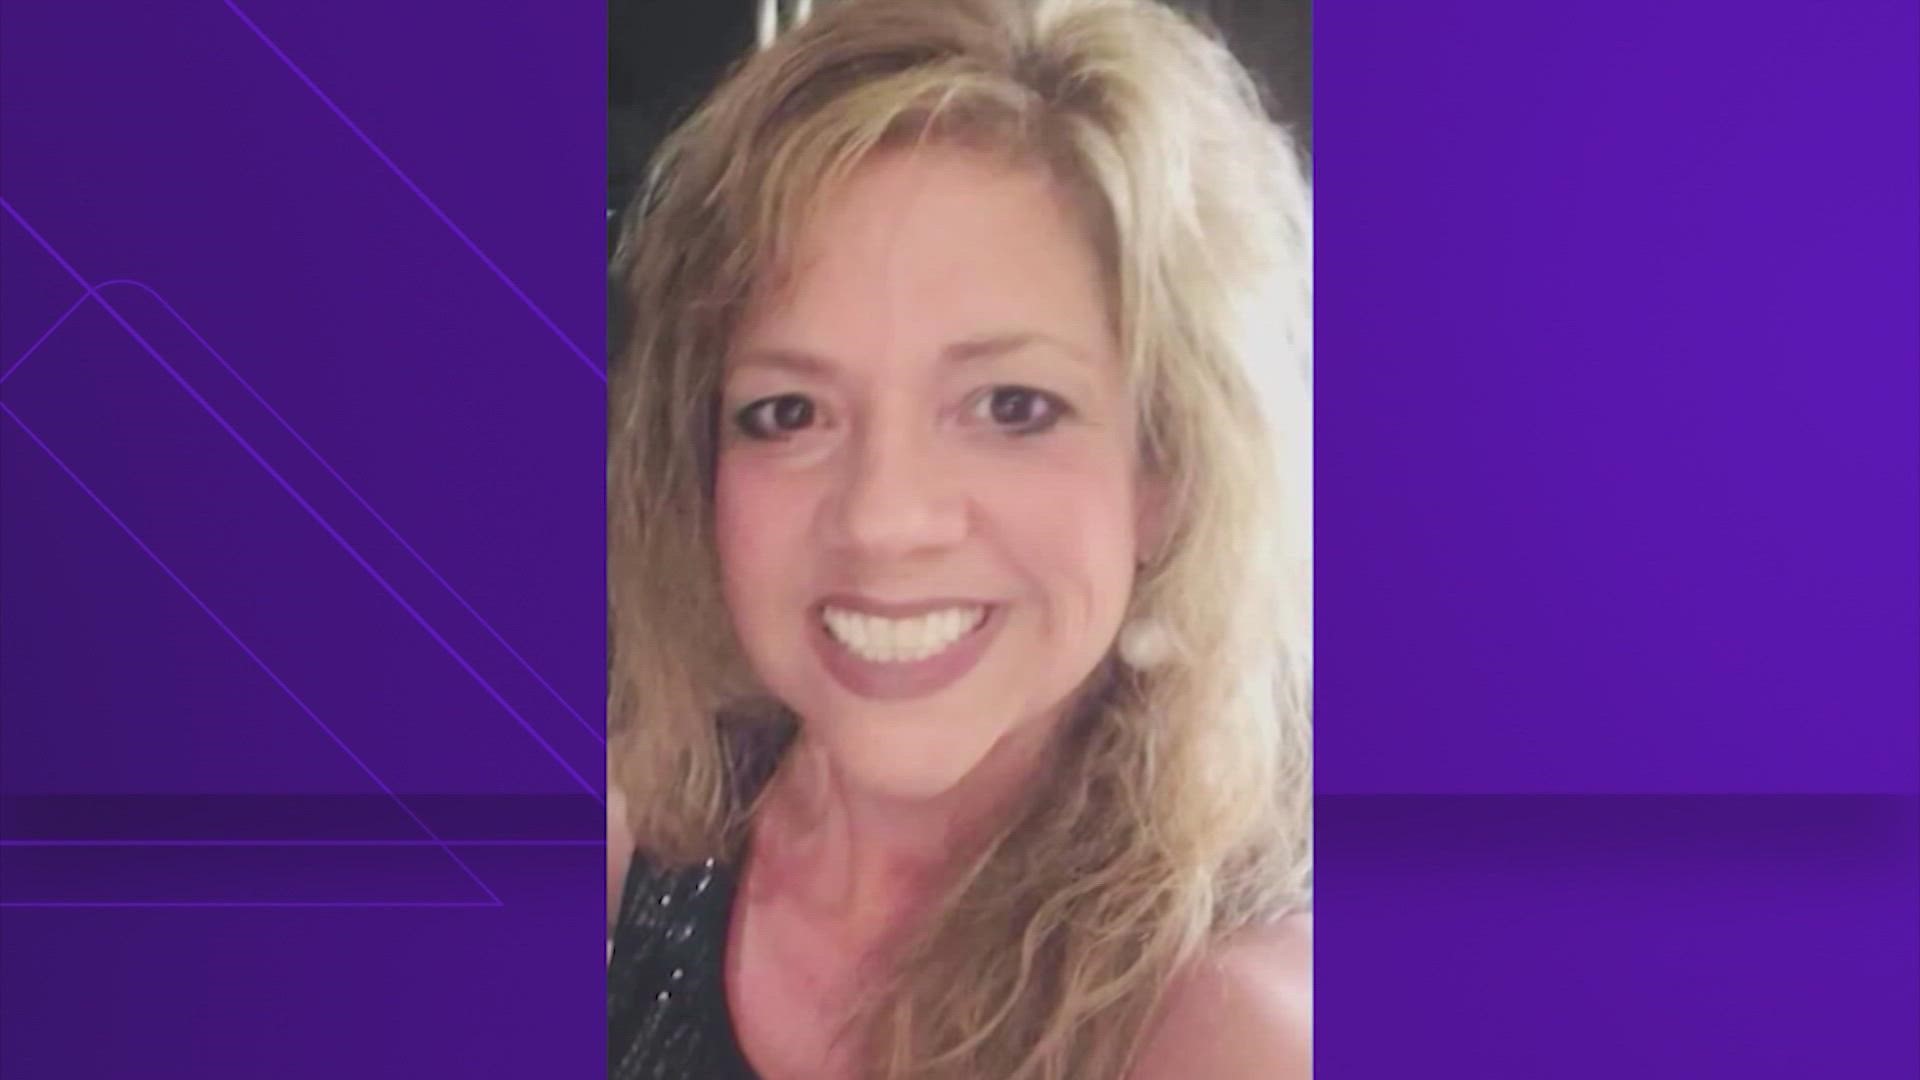 The sheriff's office said they were able to confirm that Michelle Reynolds, 48, has been safely reunited with family after she was reported missing on September 22.